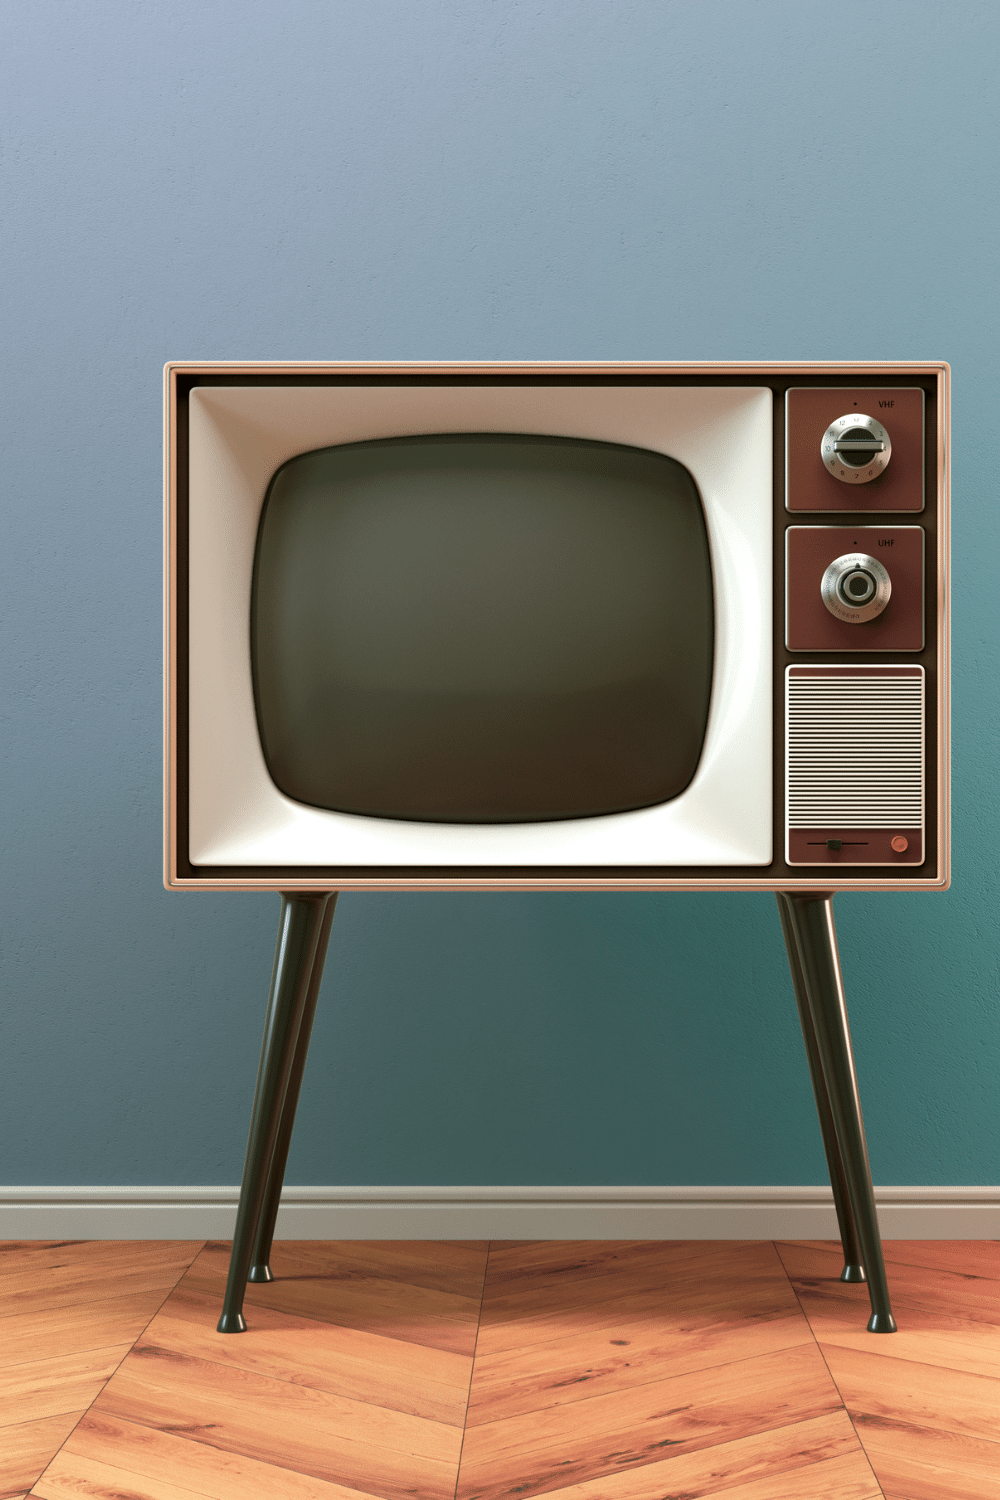 Healthy inspiring TV suggestions